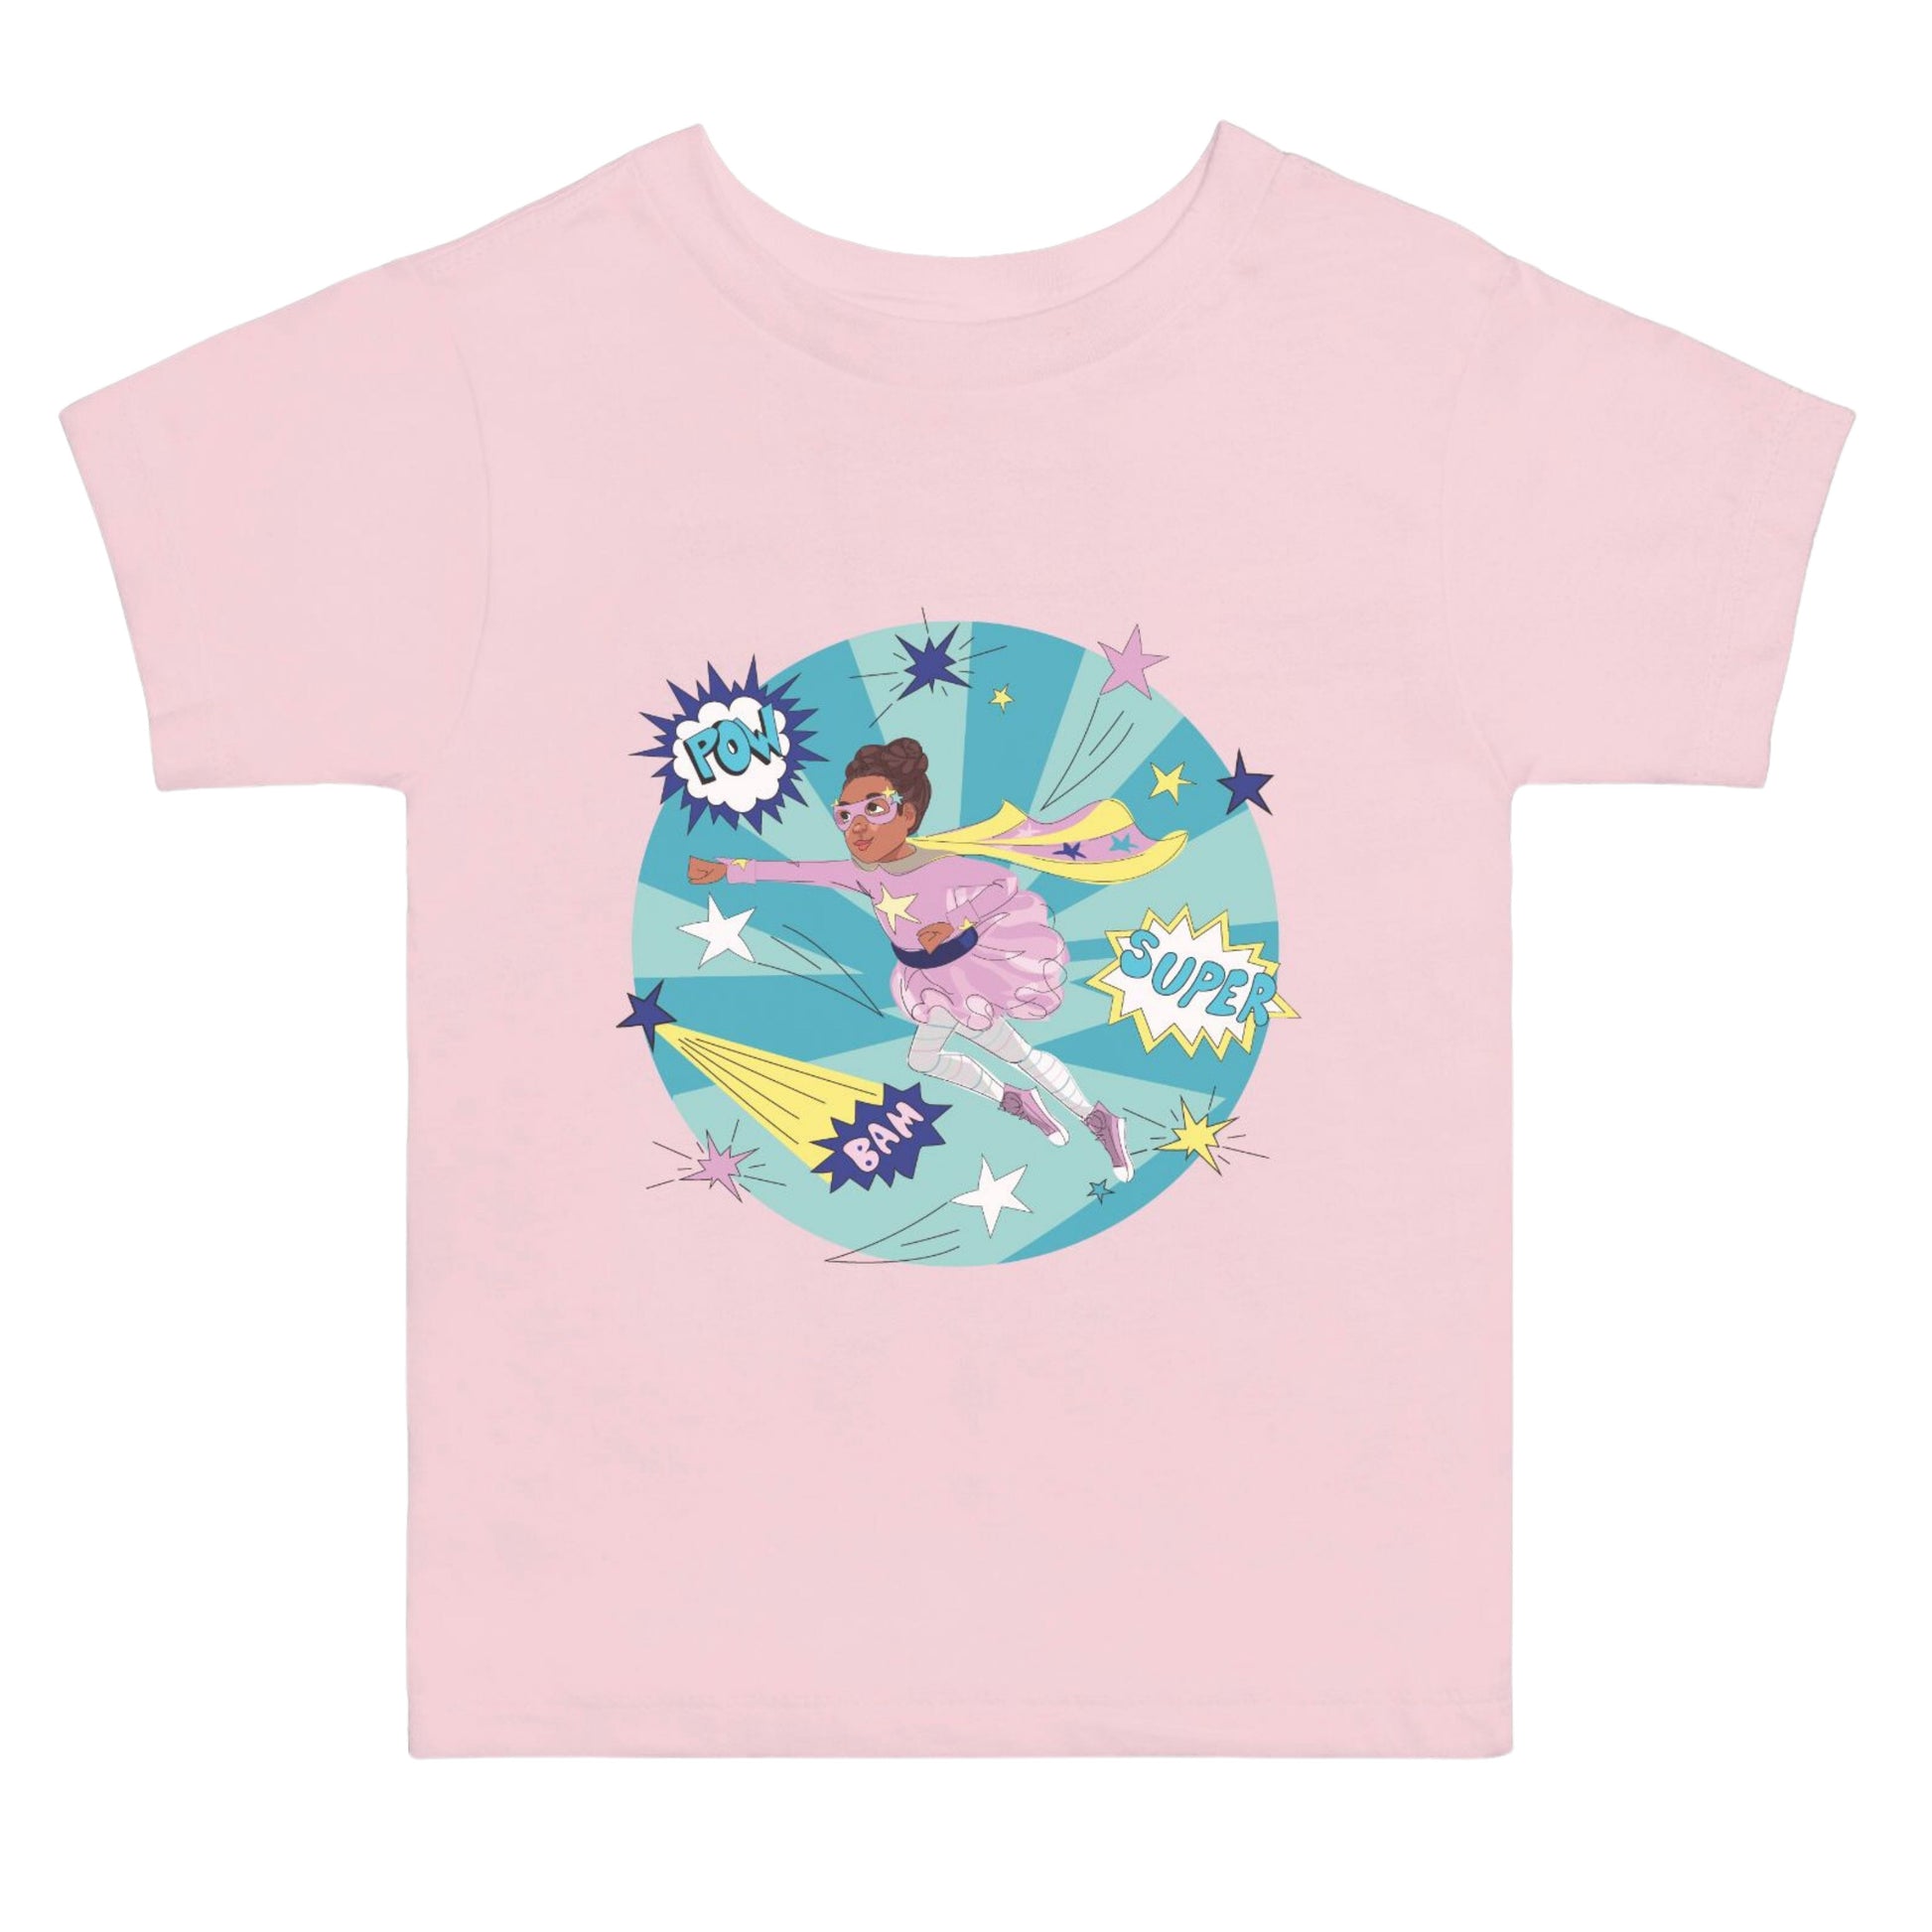 Black Supergirl Shirt Graphic Tee (pink) | Sizes 2T-5T